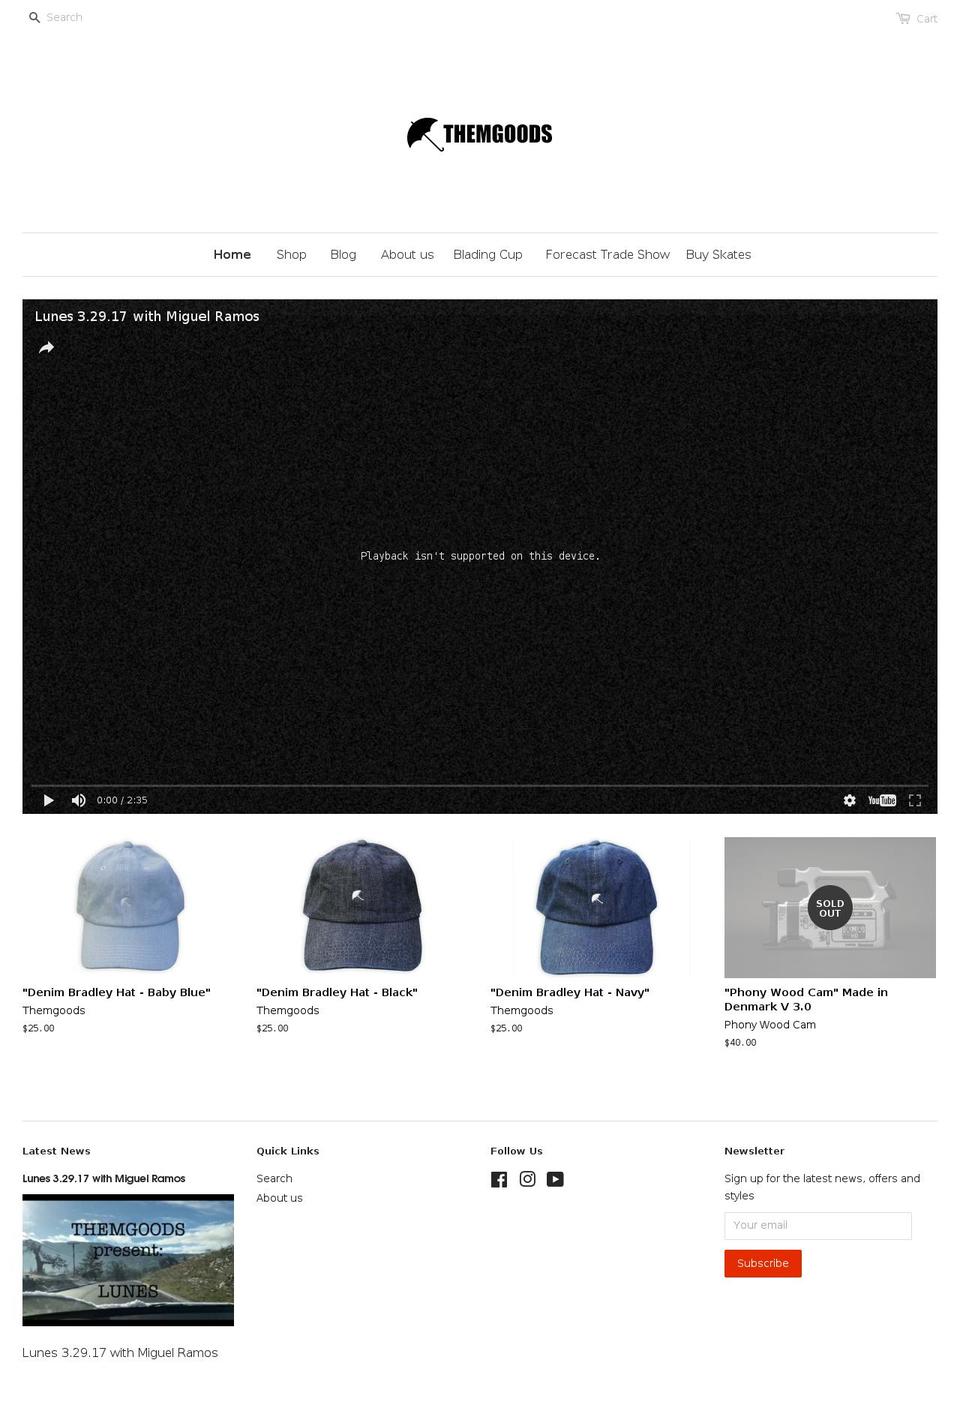 Aurora Shopify theme site example themgoods.com